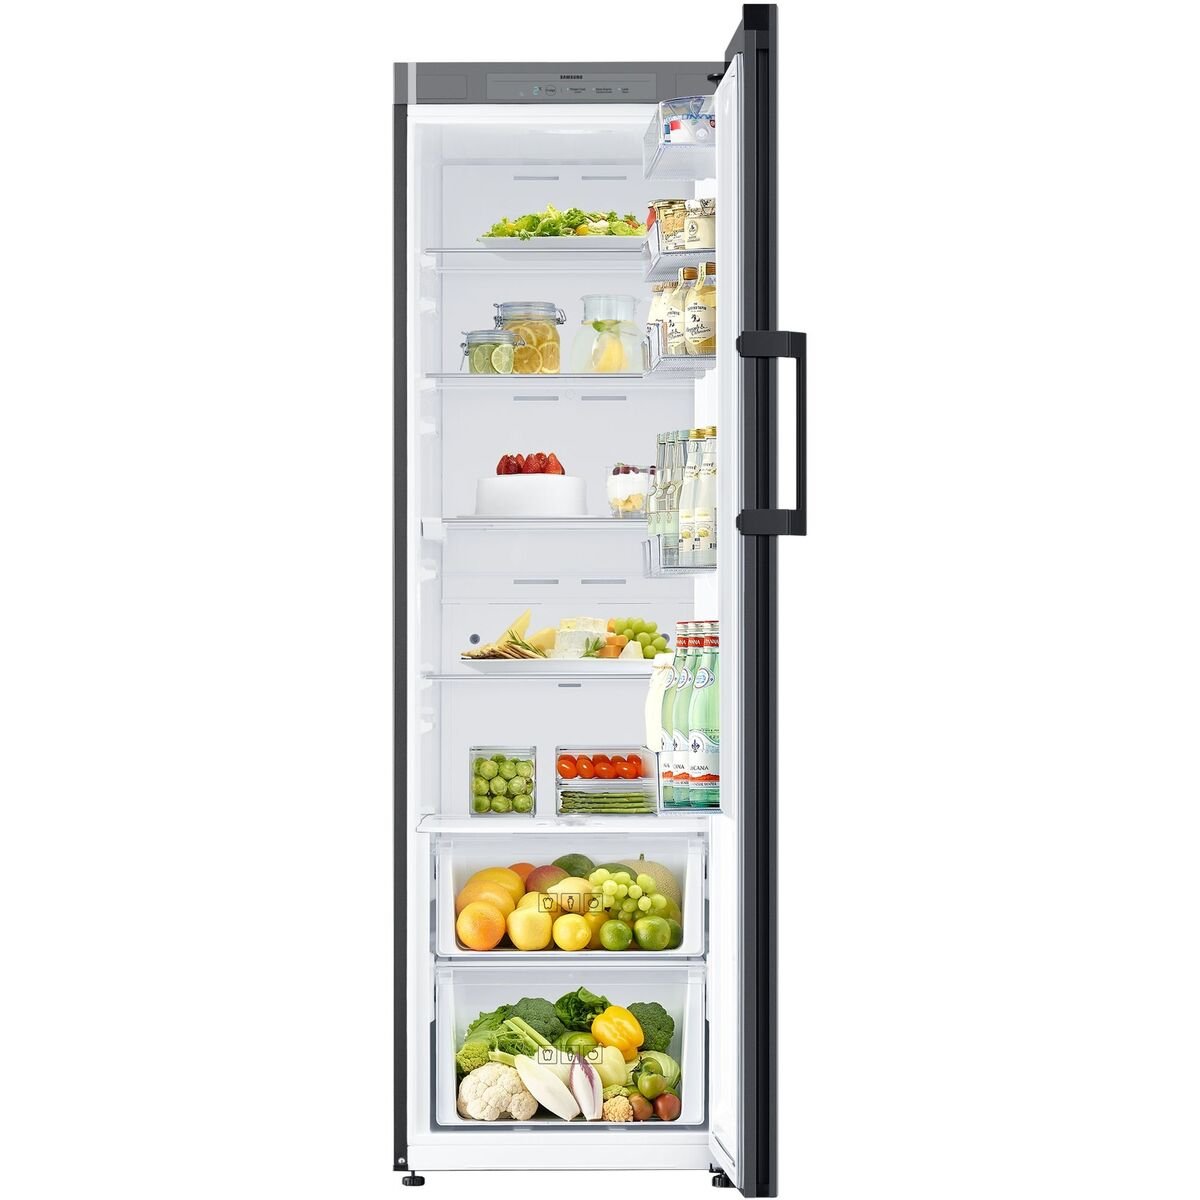 Samsung Bespoke Single Door Refrigerator RZ32T7605AP 318LTR - Customizable Color Panels Are Sold Separately